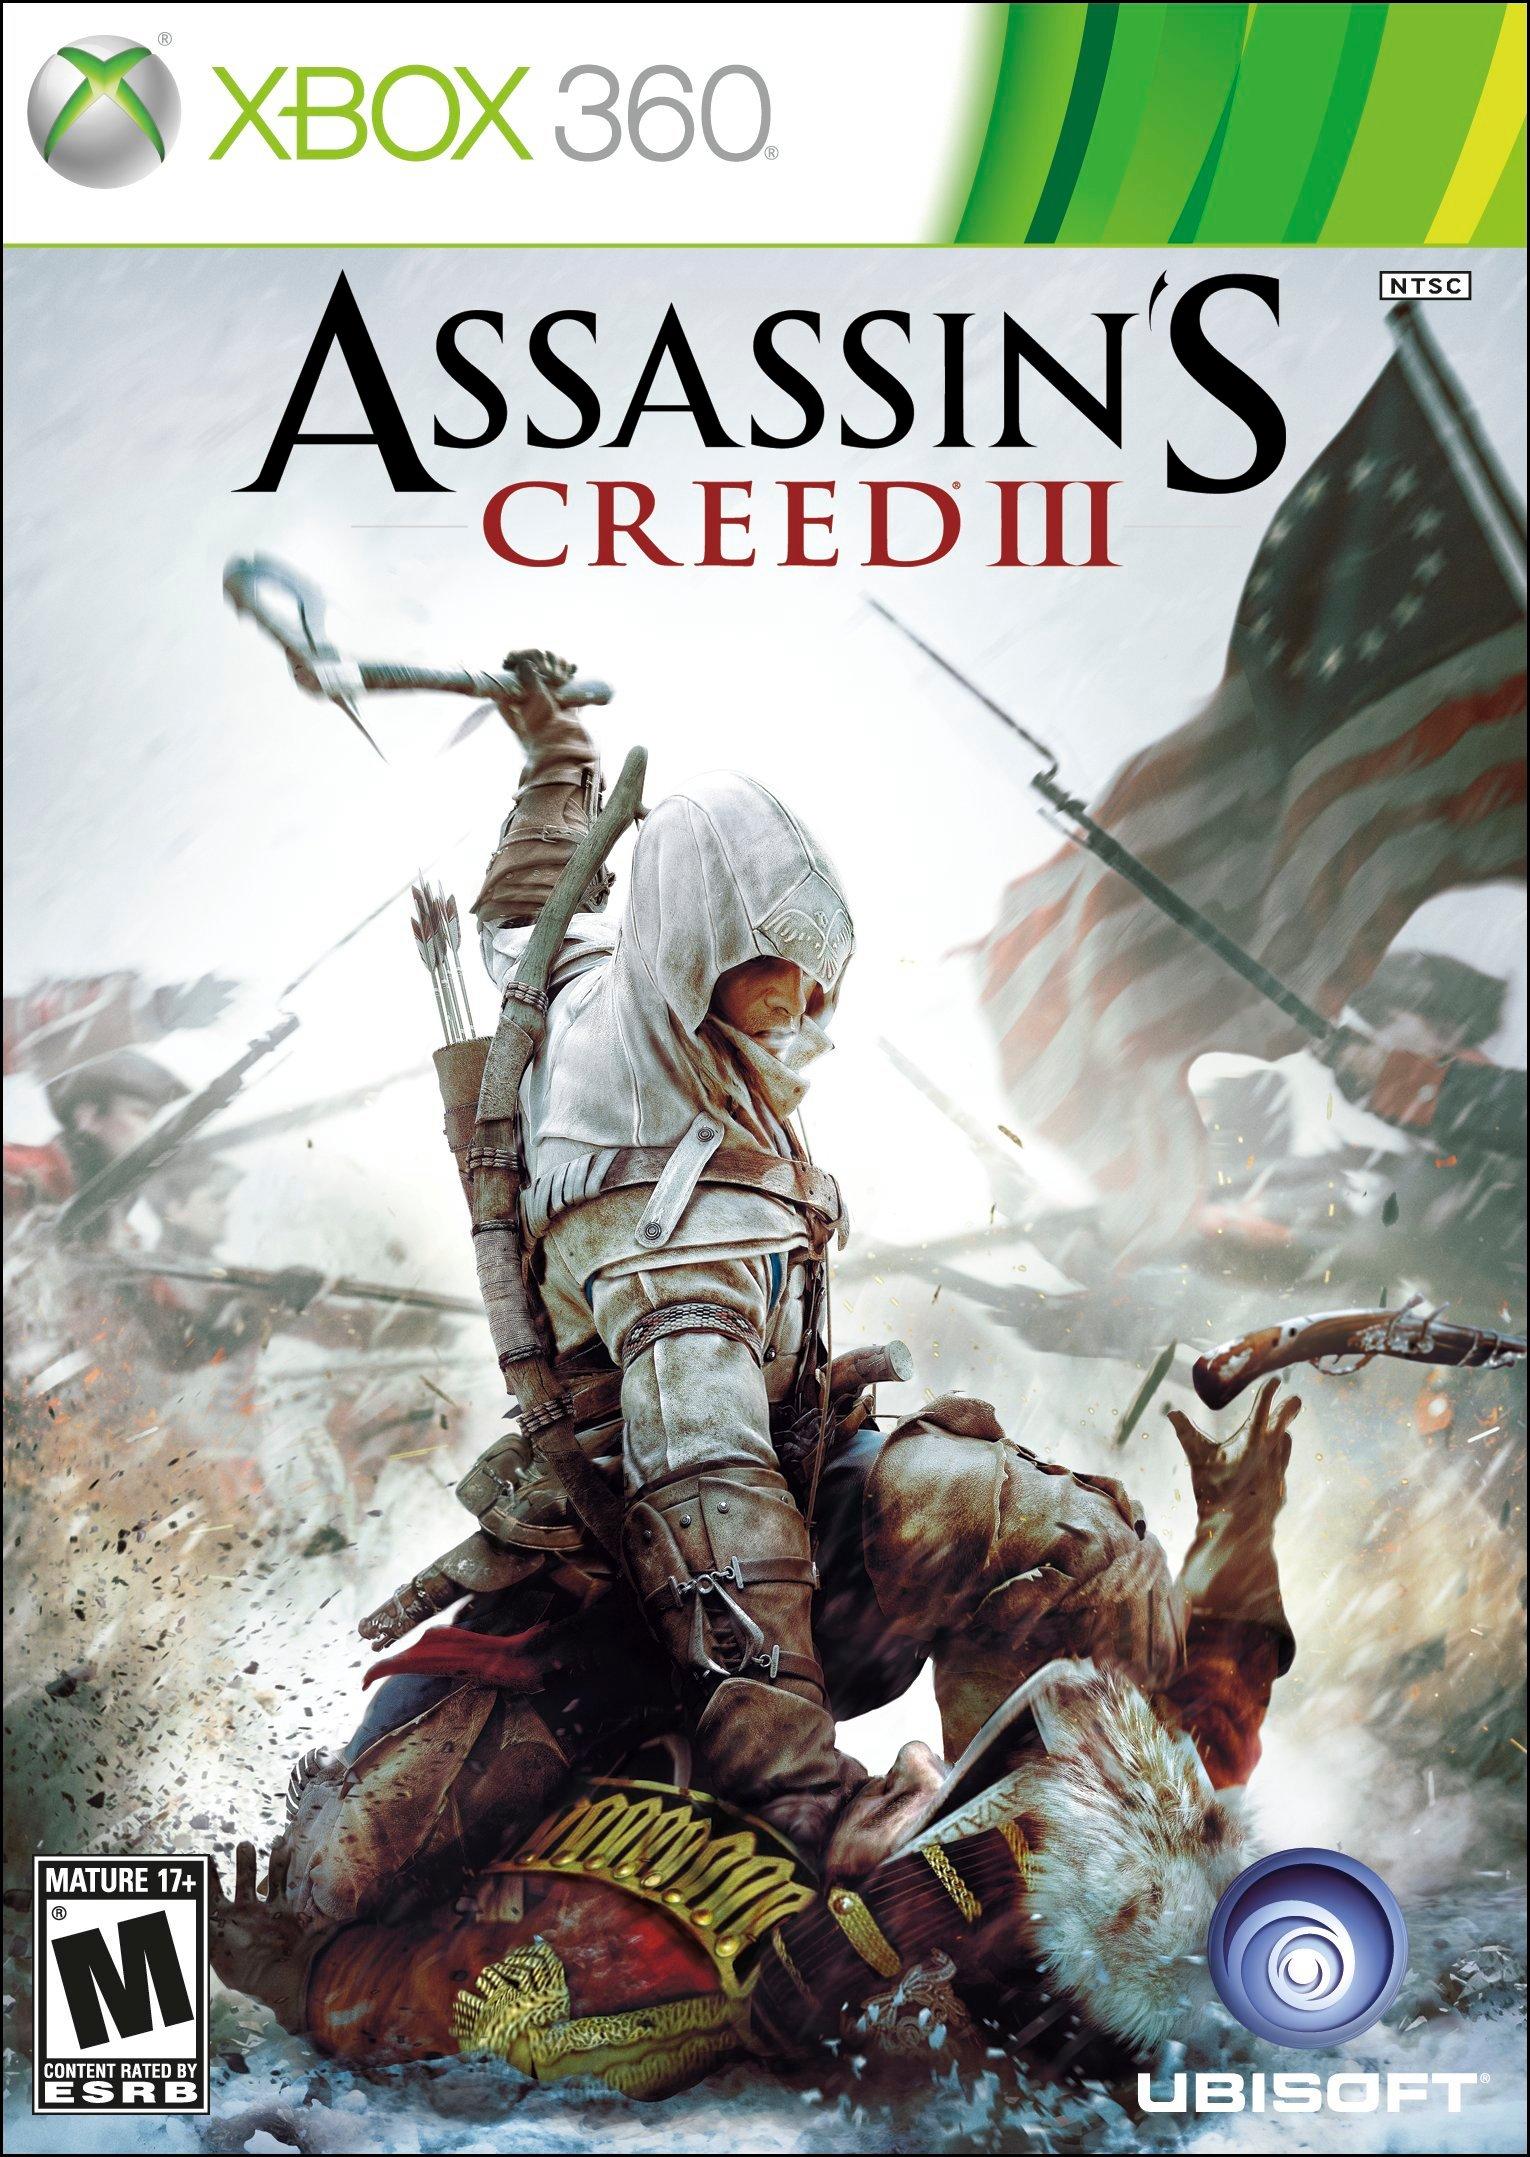 assassin's creed xbox 360 games in order